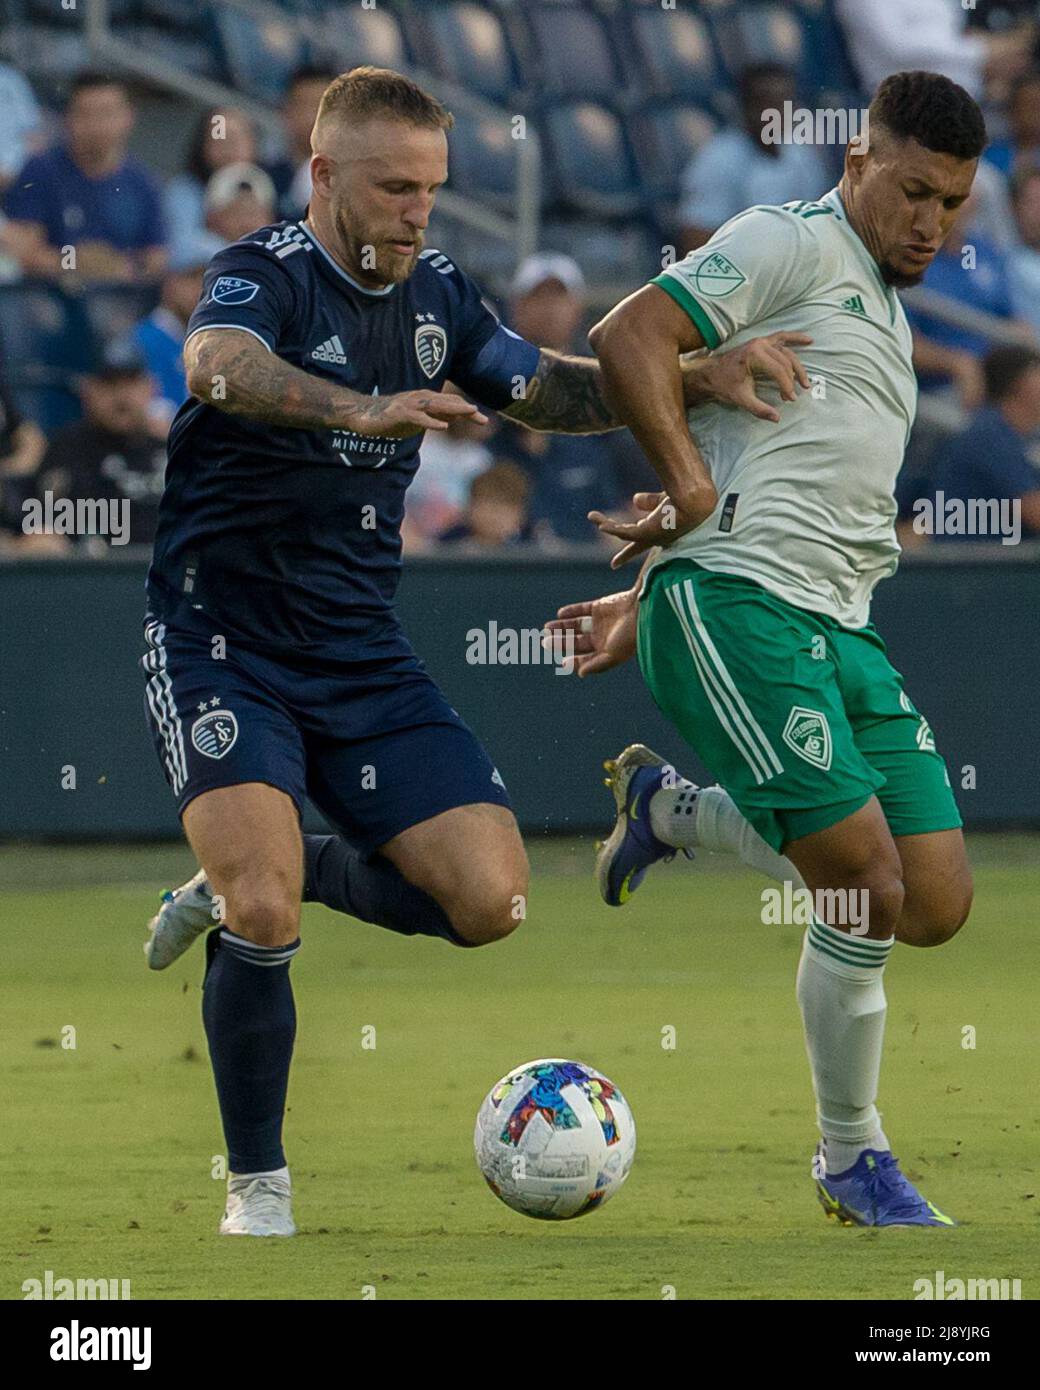 Kansas City, Kansas, USA. 17th May, 2022. Sporting KC forward Johnny Russell #7 (l) is on the offense against and Colorado Rapids midfielder Bryan Acosta #21 (r) during the first half of the game. (Credit Image: © Serena S.Y. Hsu/ZUMA Press Wire) Stock Photo